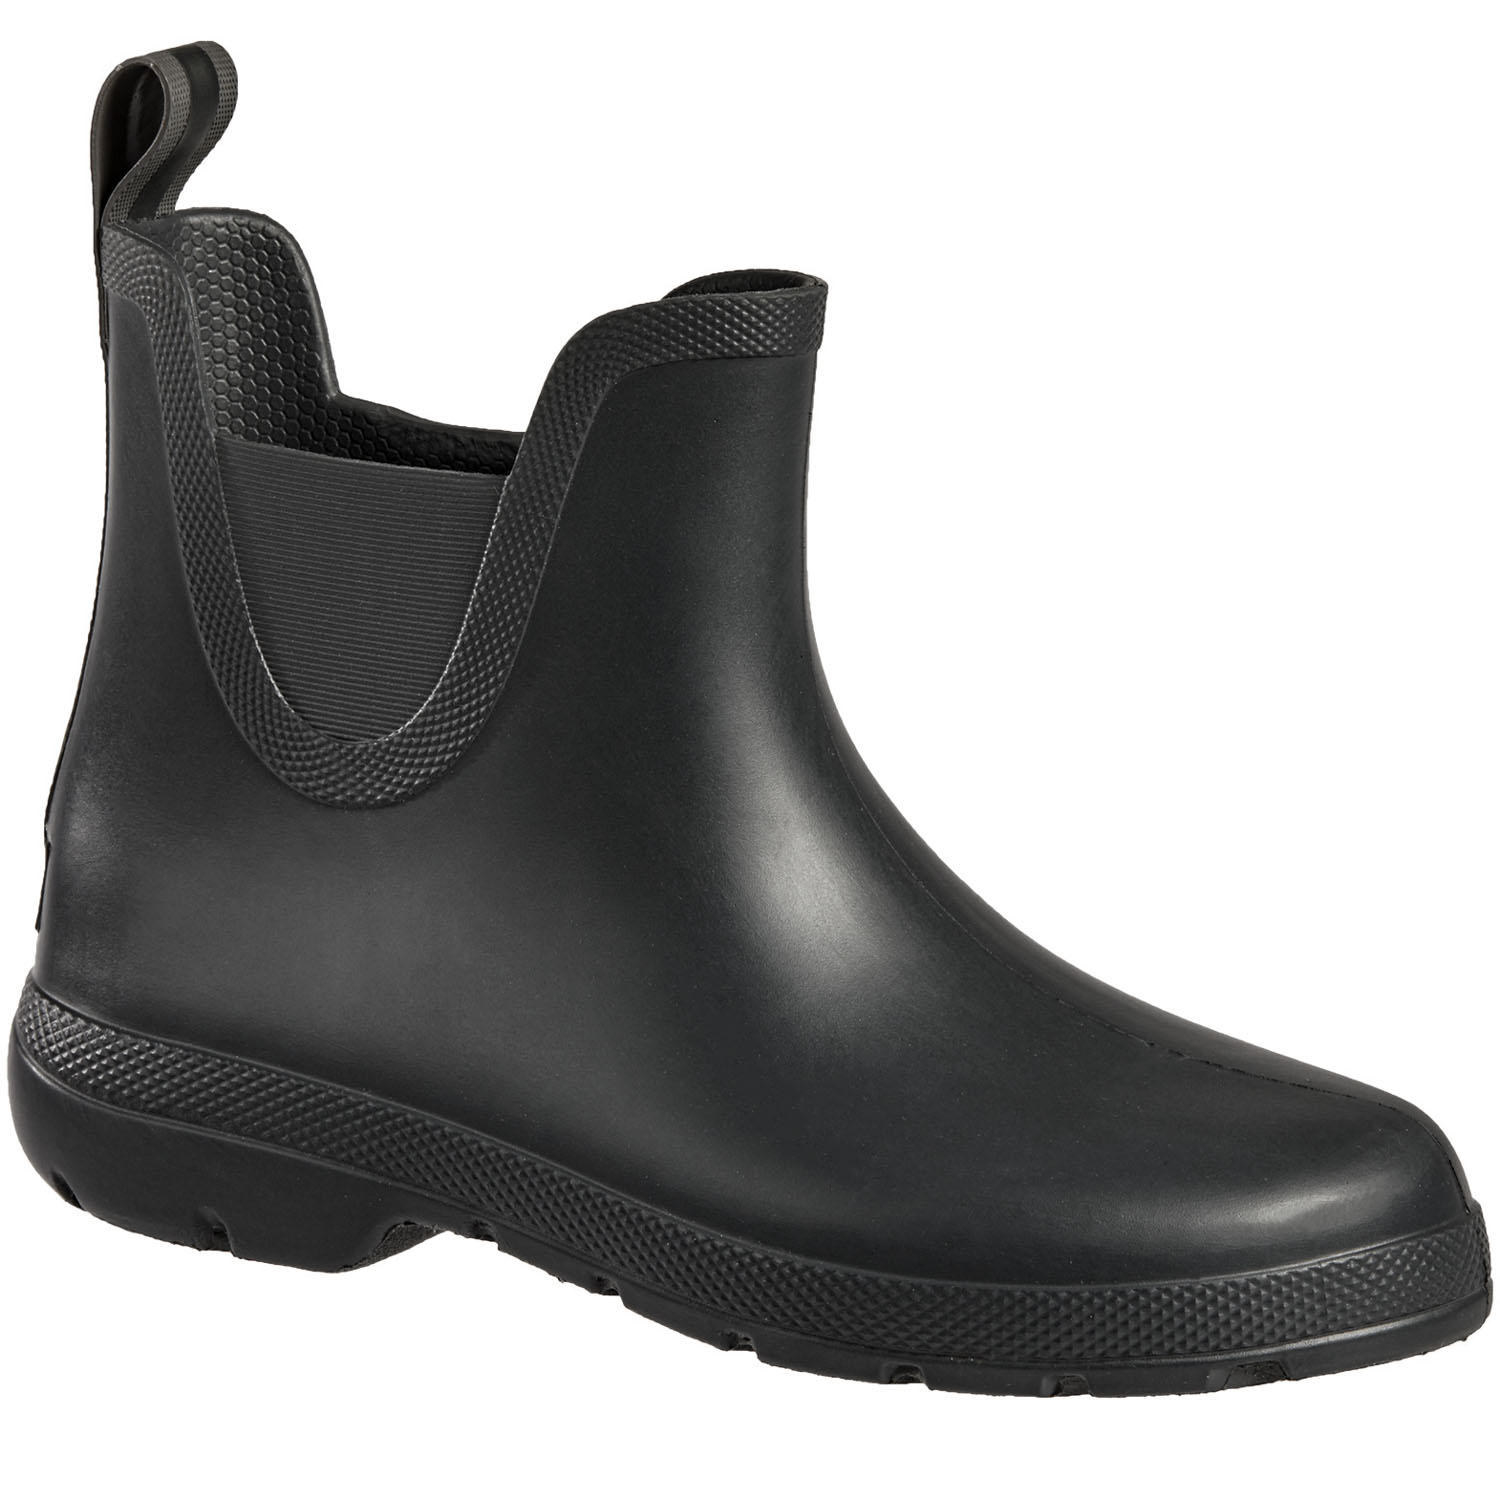 A pair of slip-resistant ankle rain boot